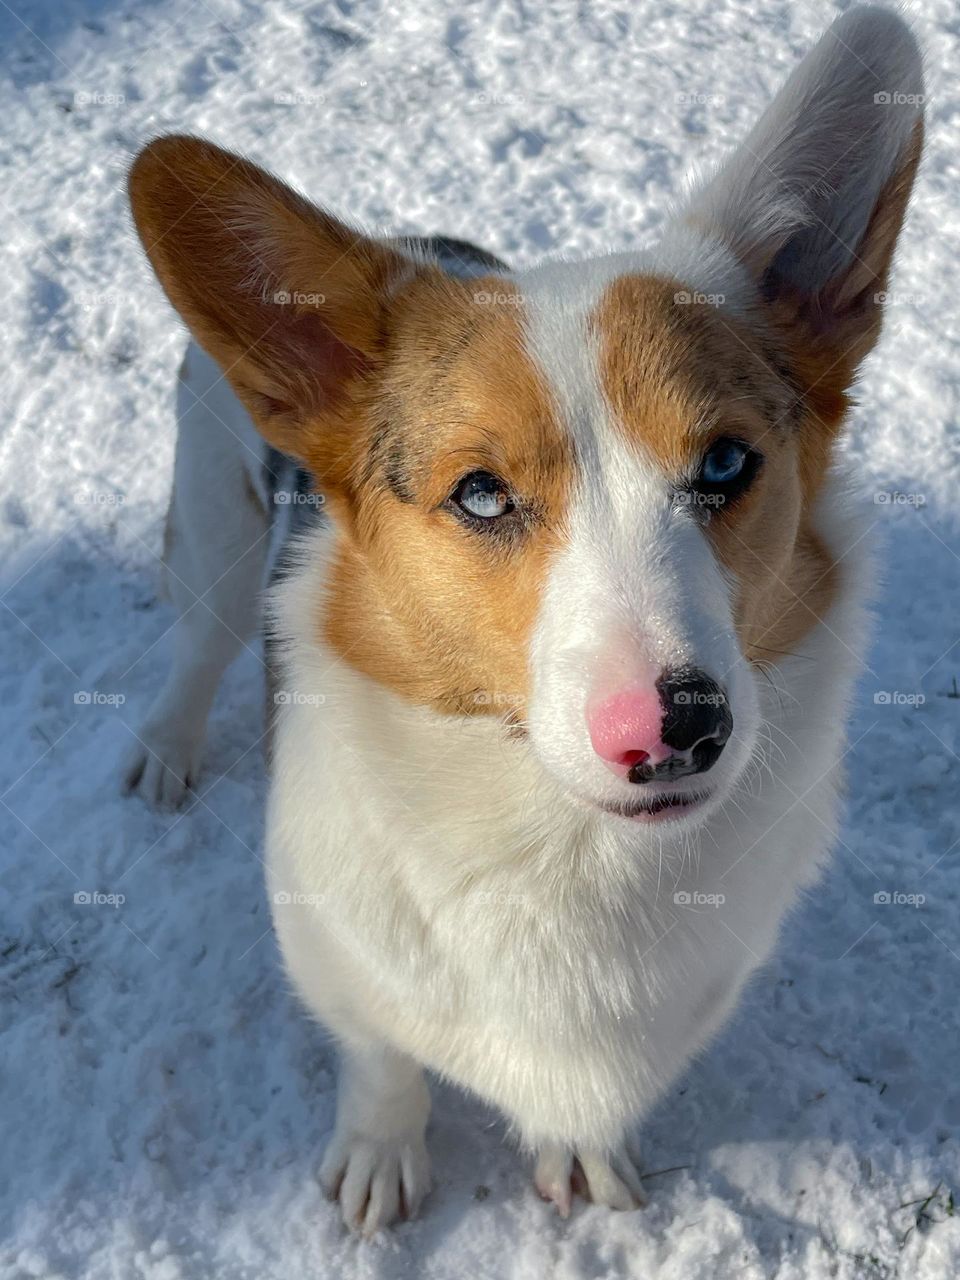 Corgi pup puppy dog dogs puppie pet lover pets canine animal cute adorable outdoors outside snow blue eyes speckle nose good times playing phone photography winter day daytime cold weather 